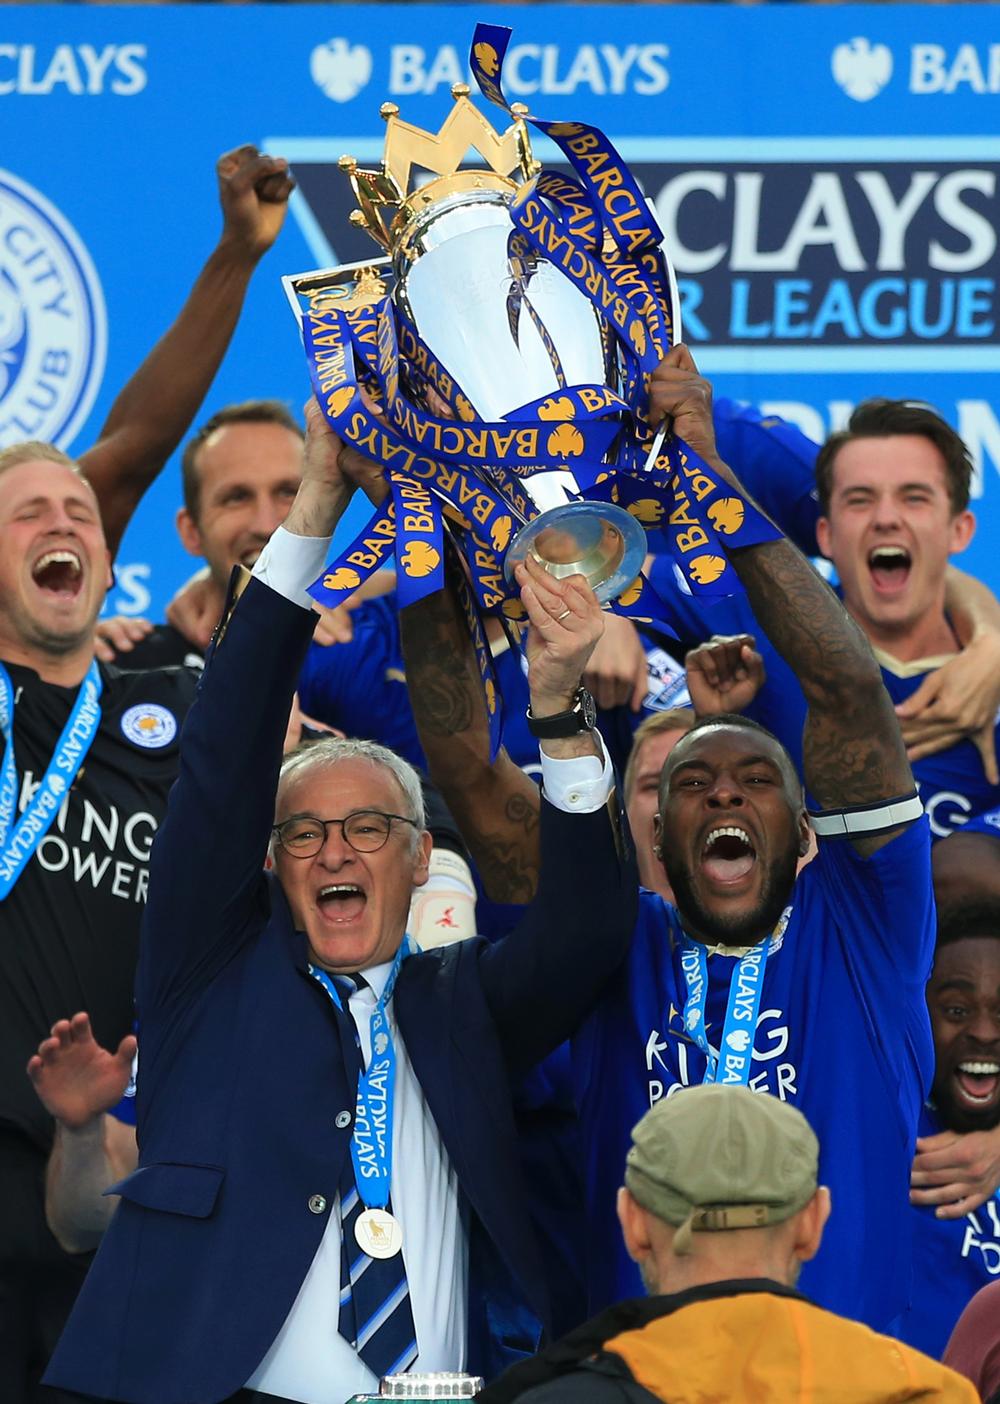 Leicester City’s unlikely victory will go down as one of the greatest sporting stories of all time / Nick Potts / PA Wire / Press Association Images